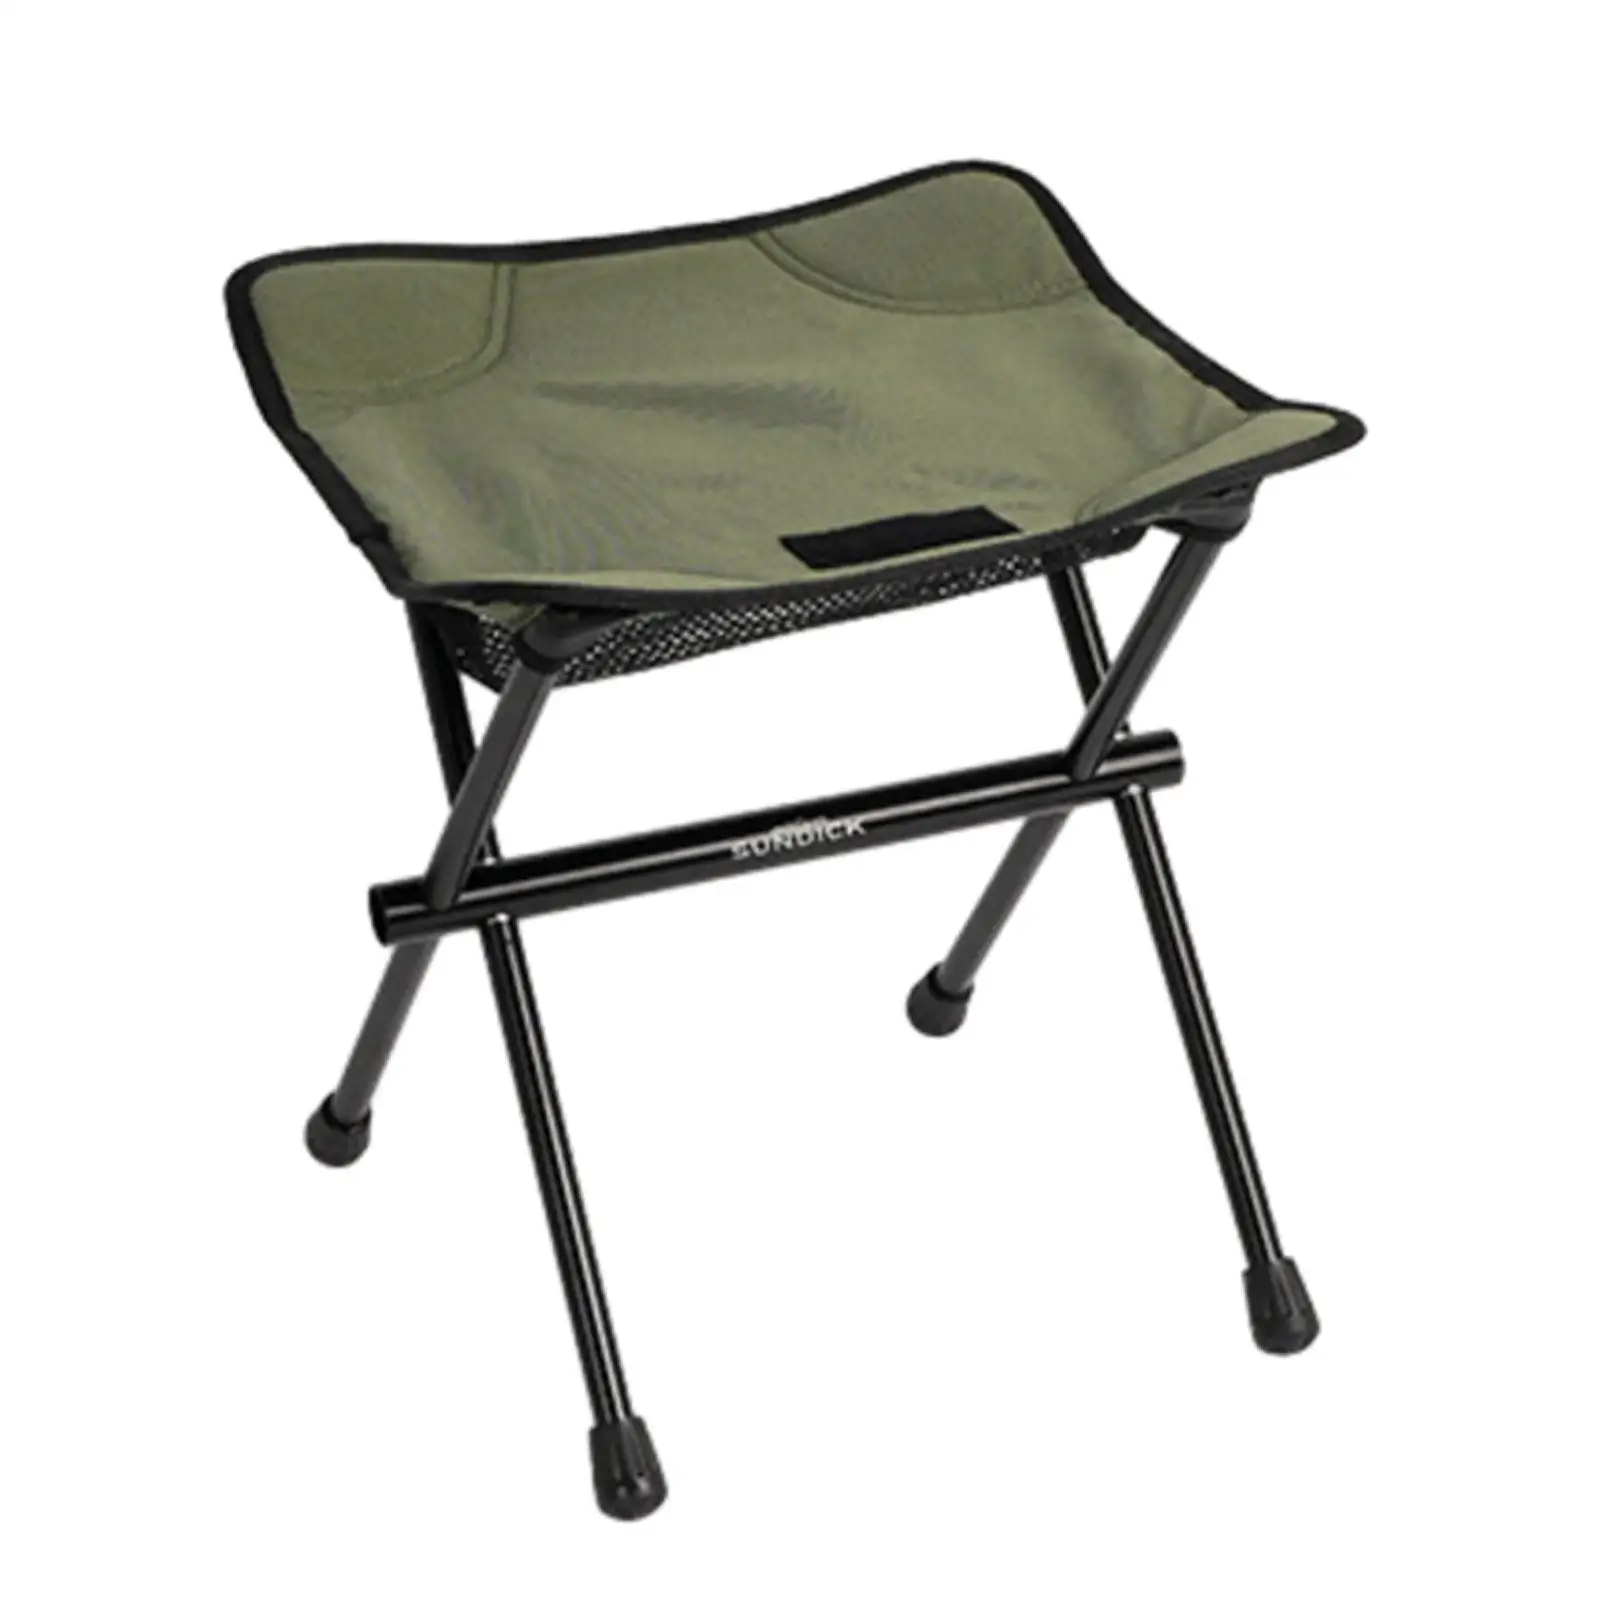 Folding Camping Stool Collapsible Stool Footrest Portable Fishing Chair Saddle Chair for Gardening Beach Hiking Picnic Lawn